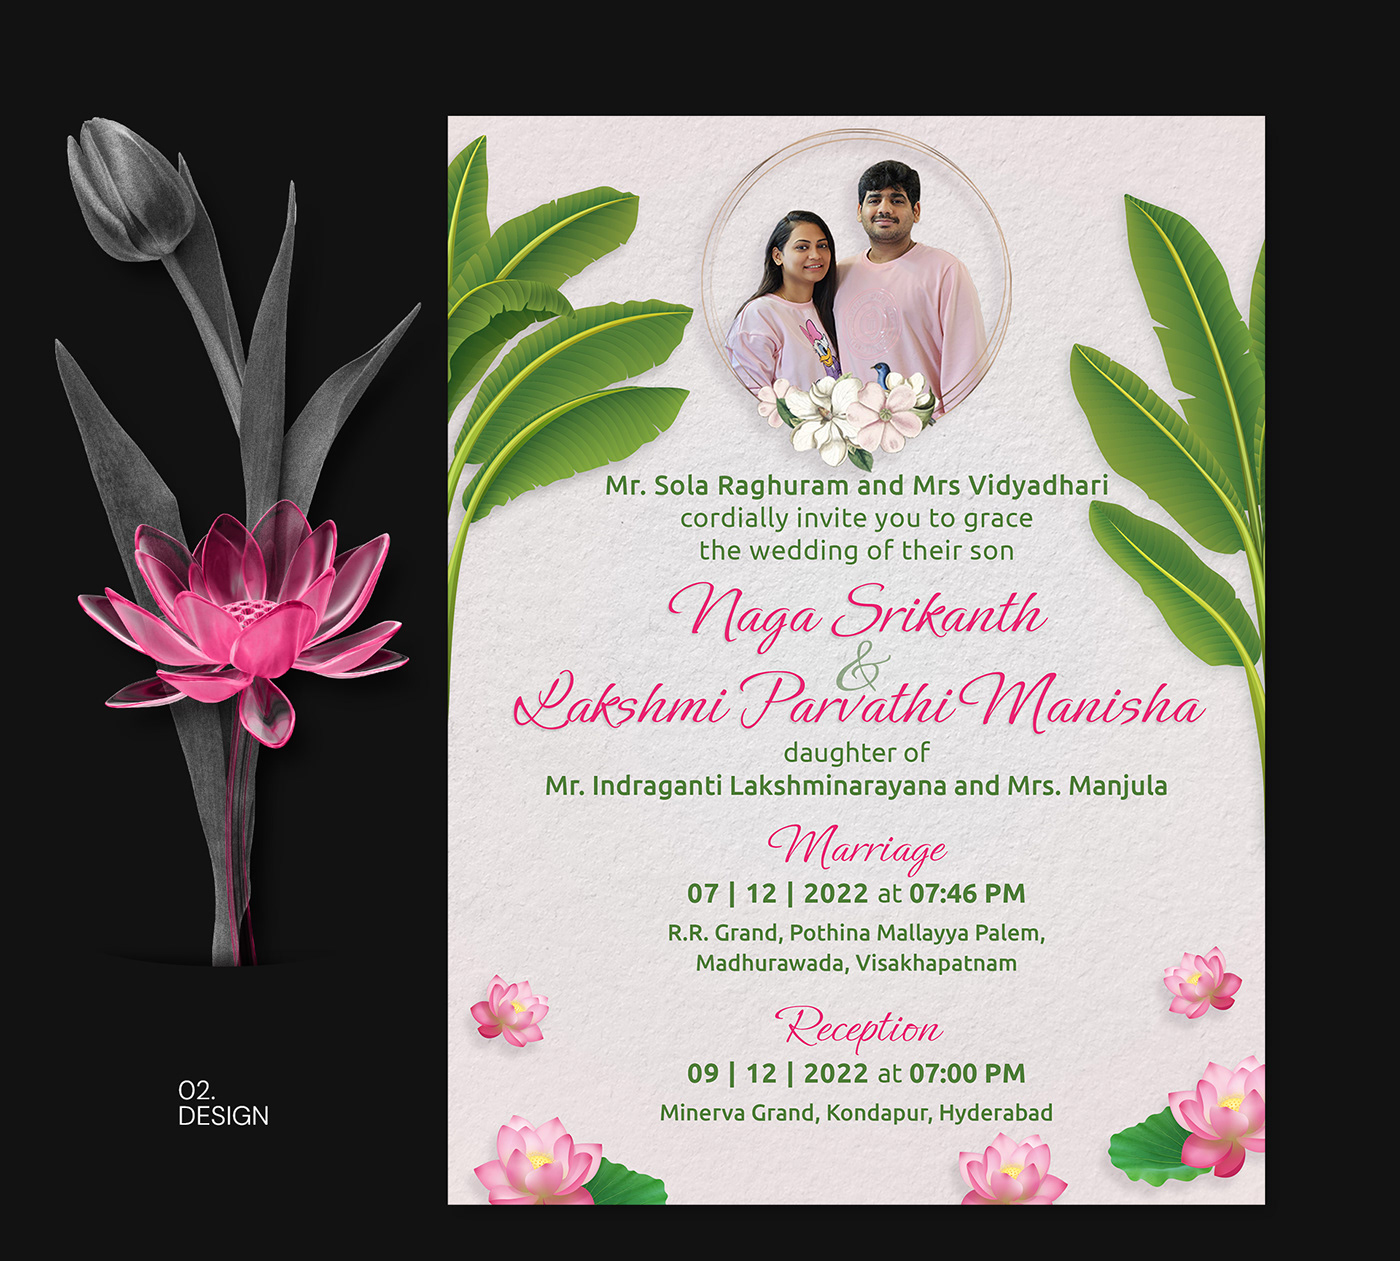 Wedding invitation for the South Indian wedding. It features a vibrant image of the couple.